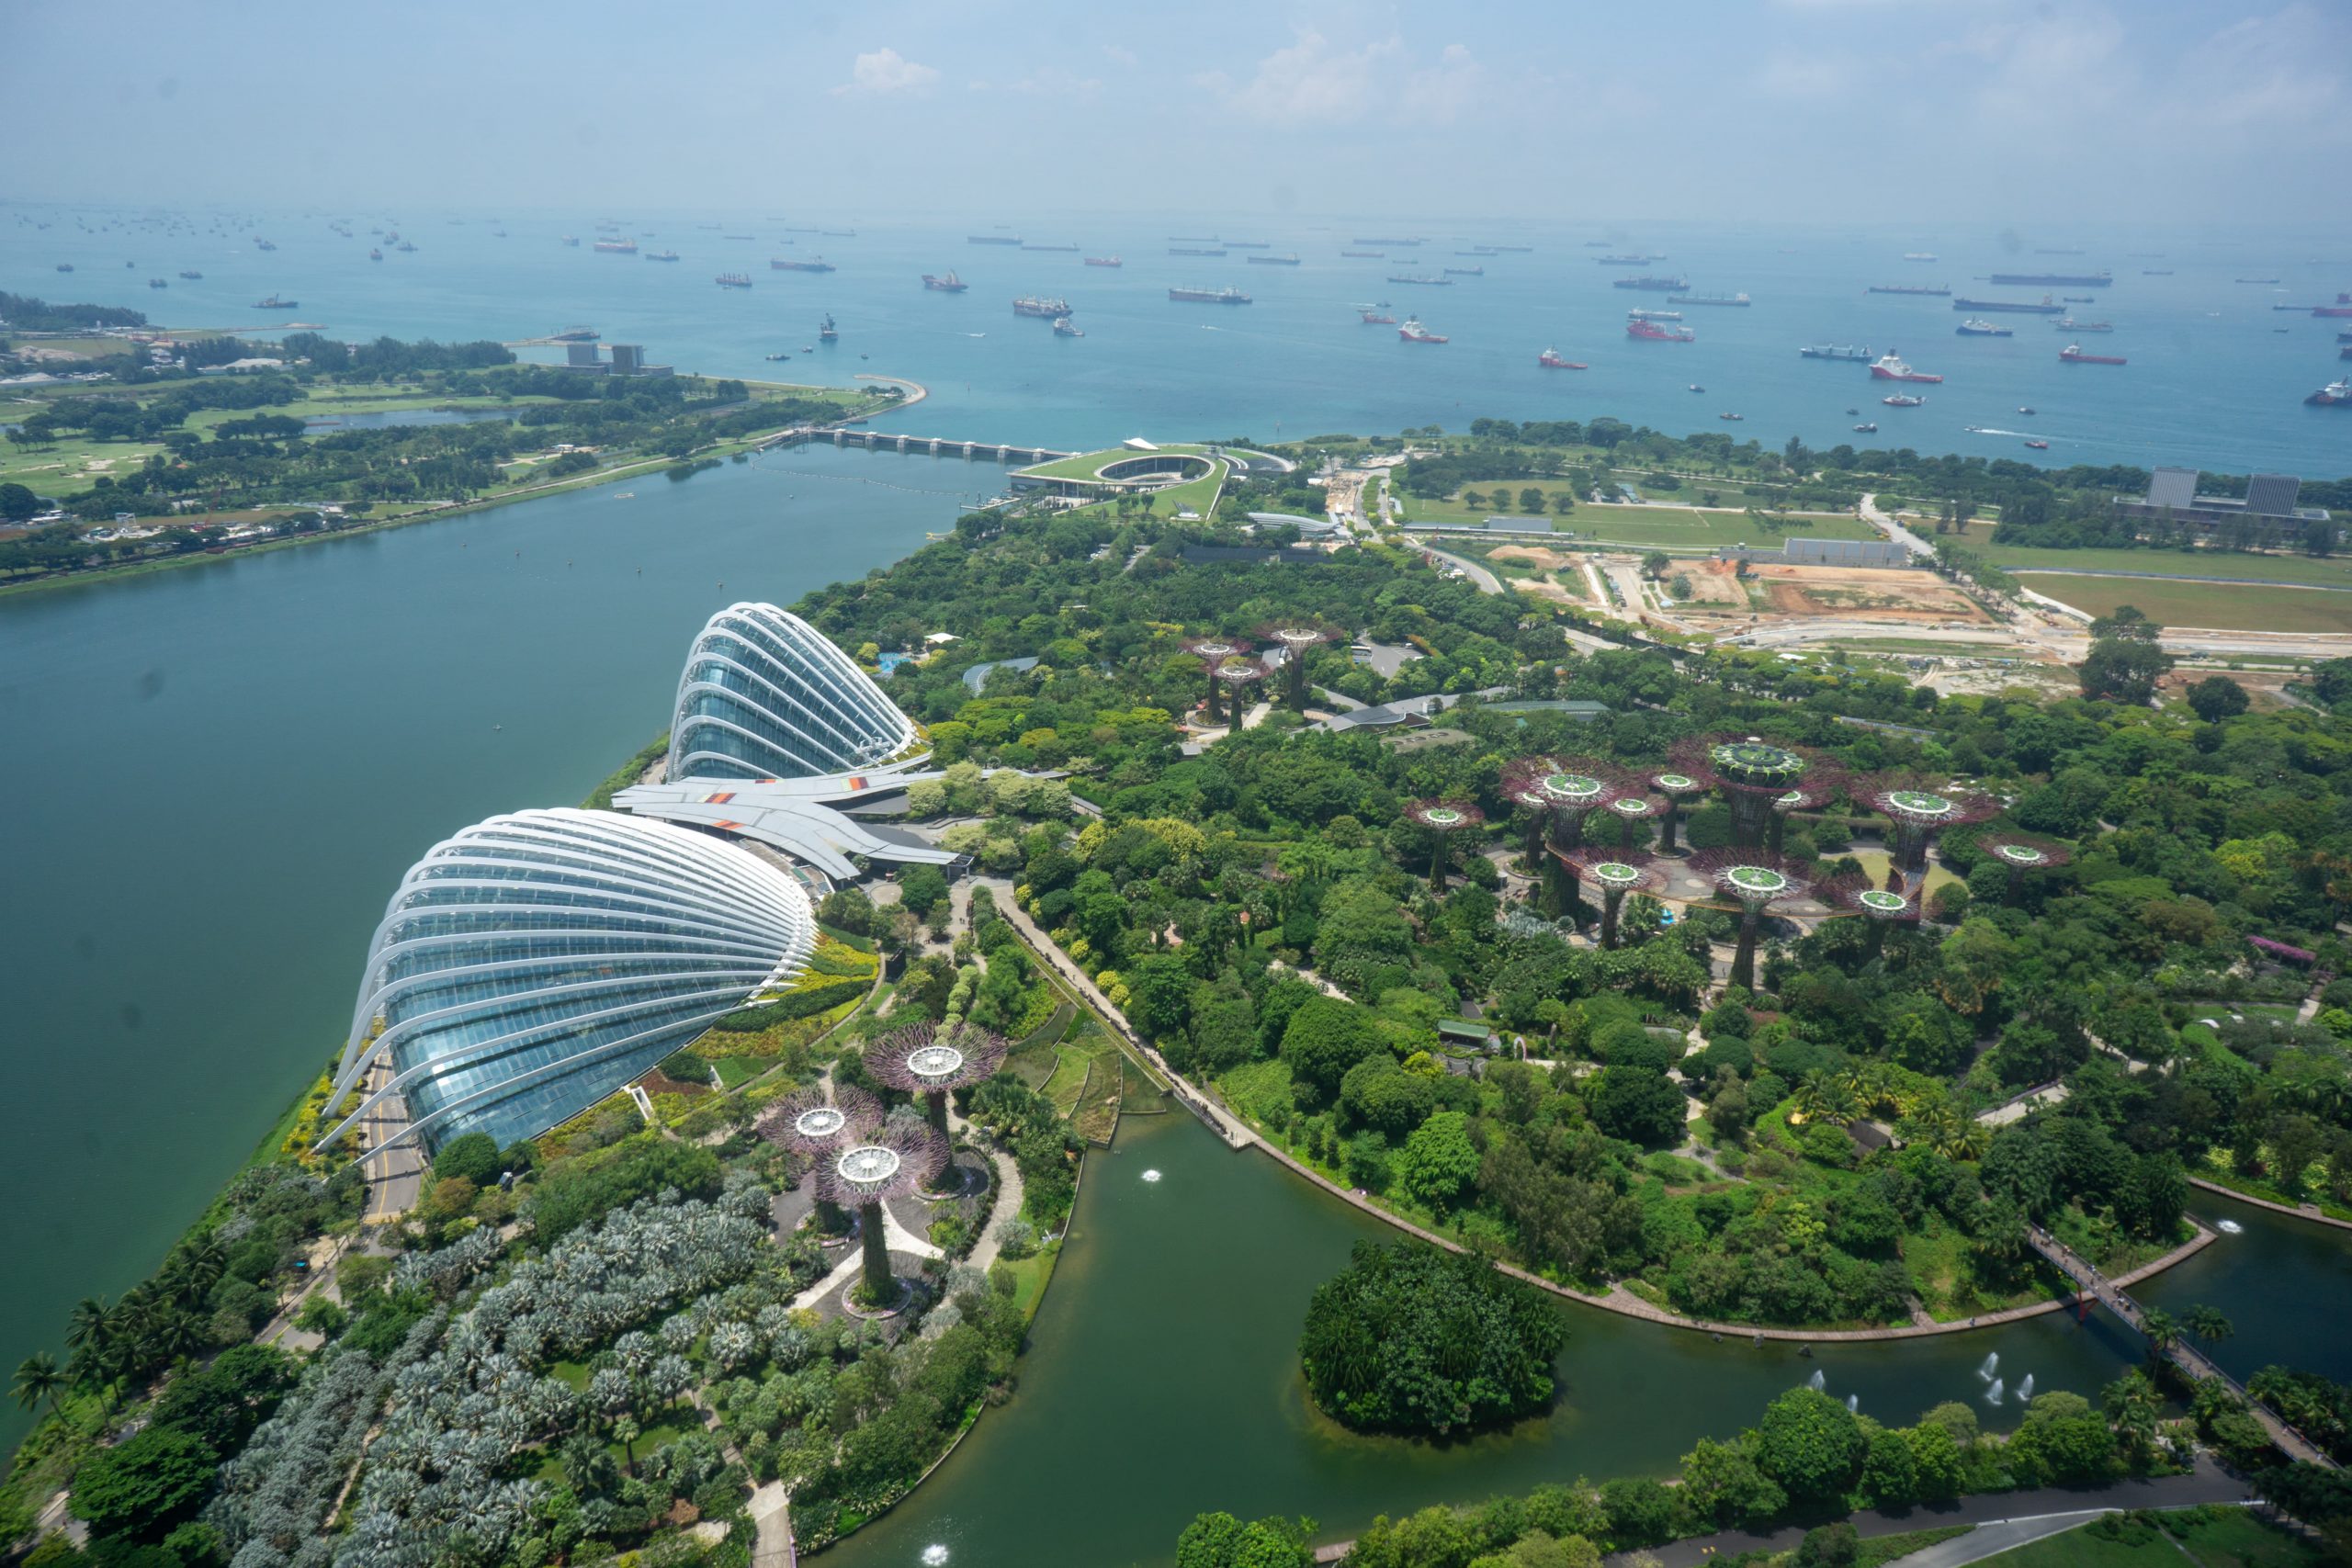 View of the Gardens by the Bay from the Marina Bay Sands SkyPark